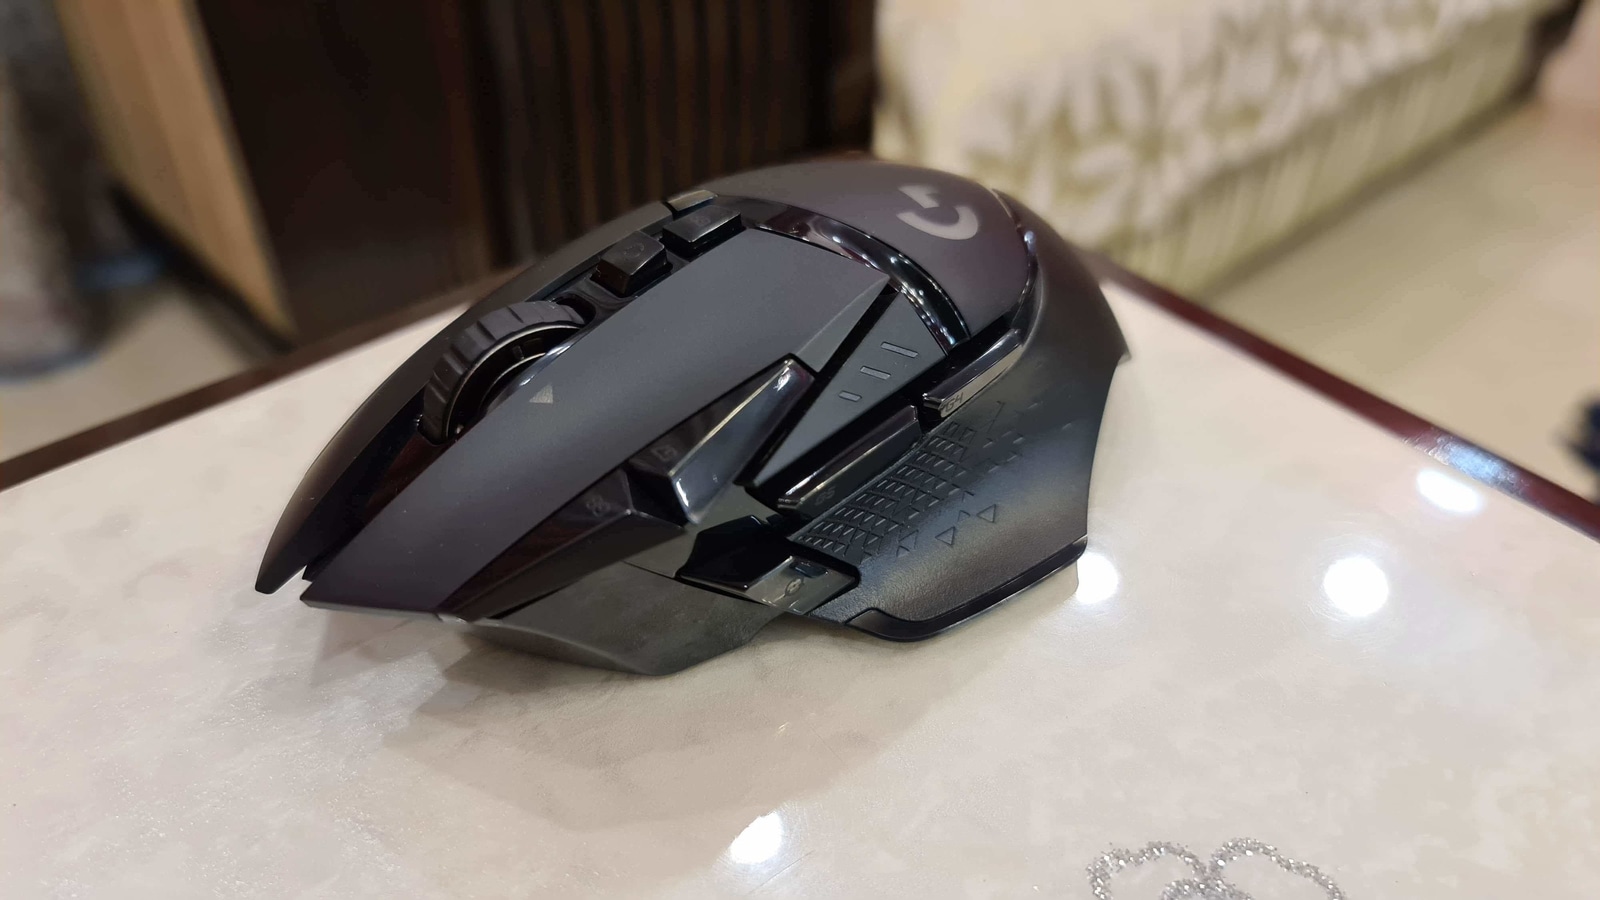 Logitech G502 Lightspeed Review: The Top Gaming Mouse Goes